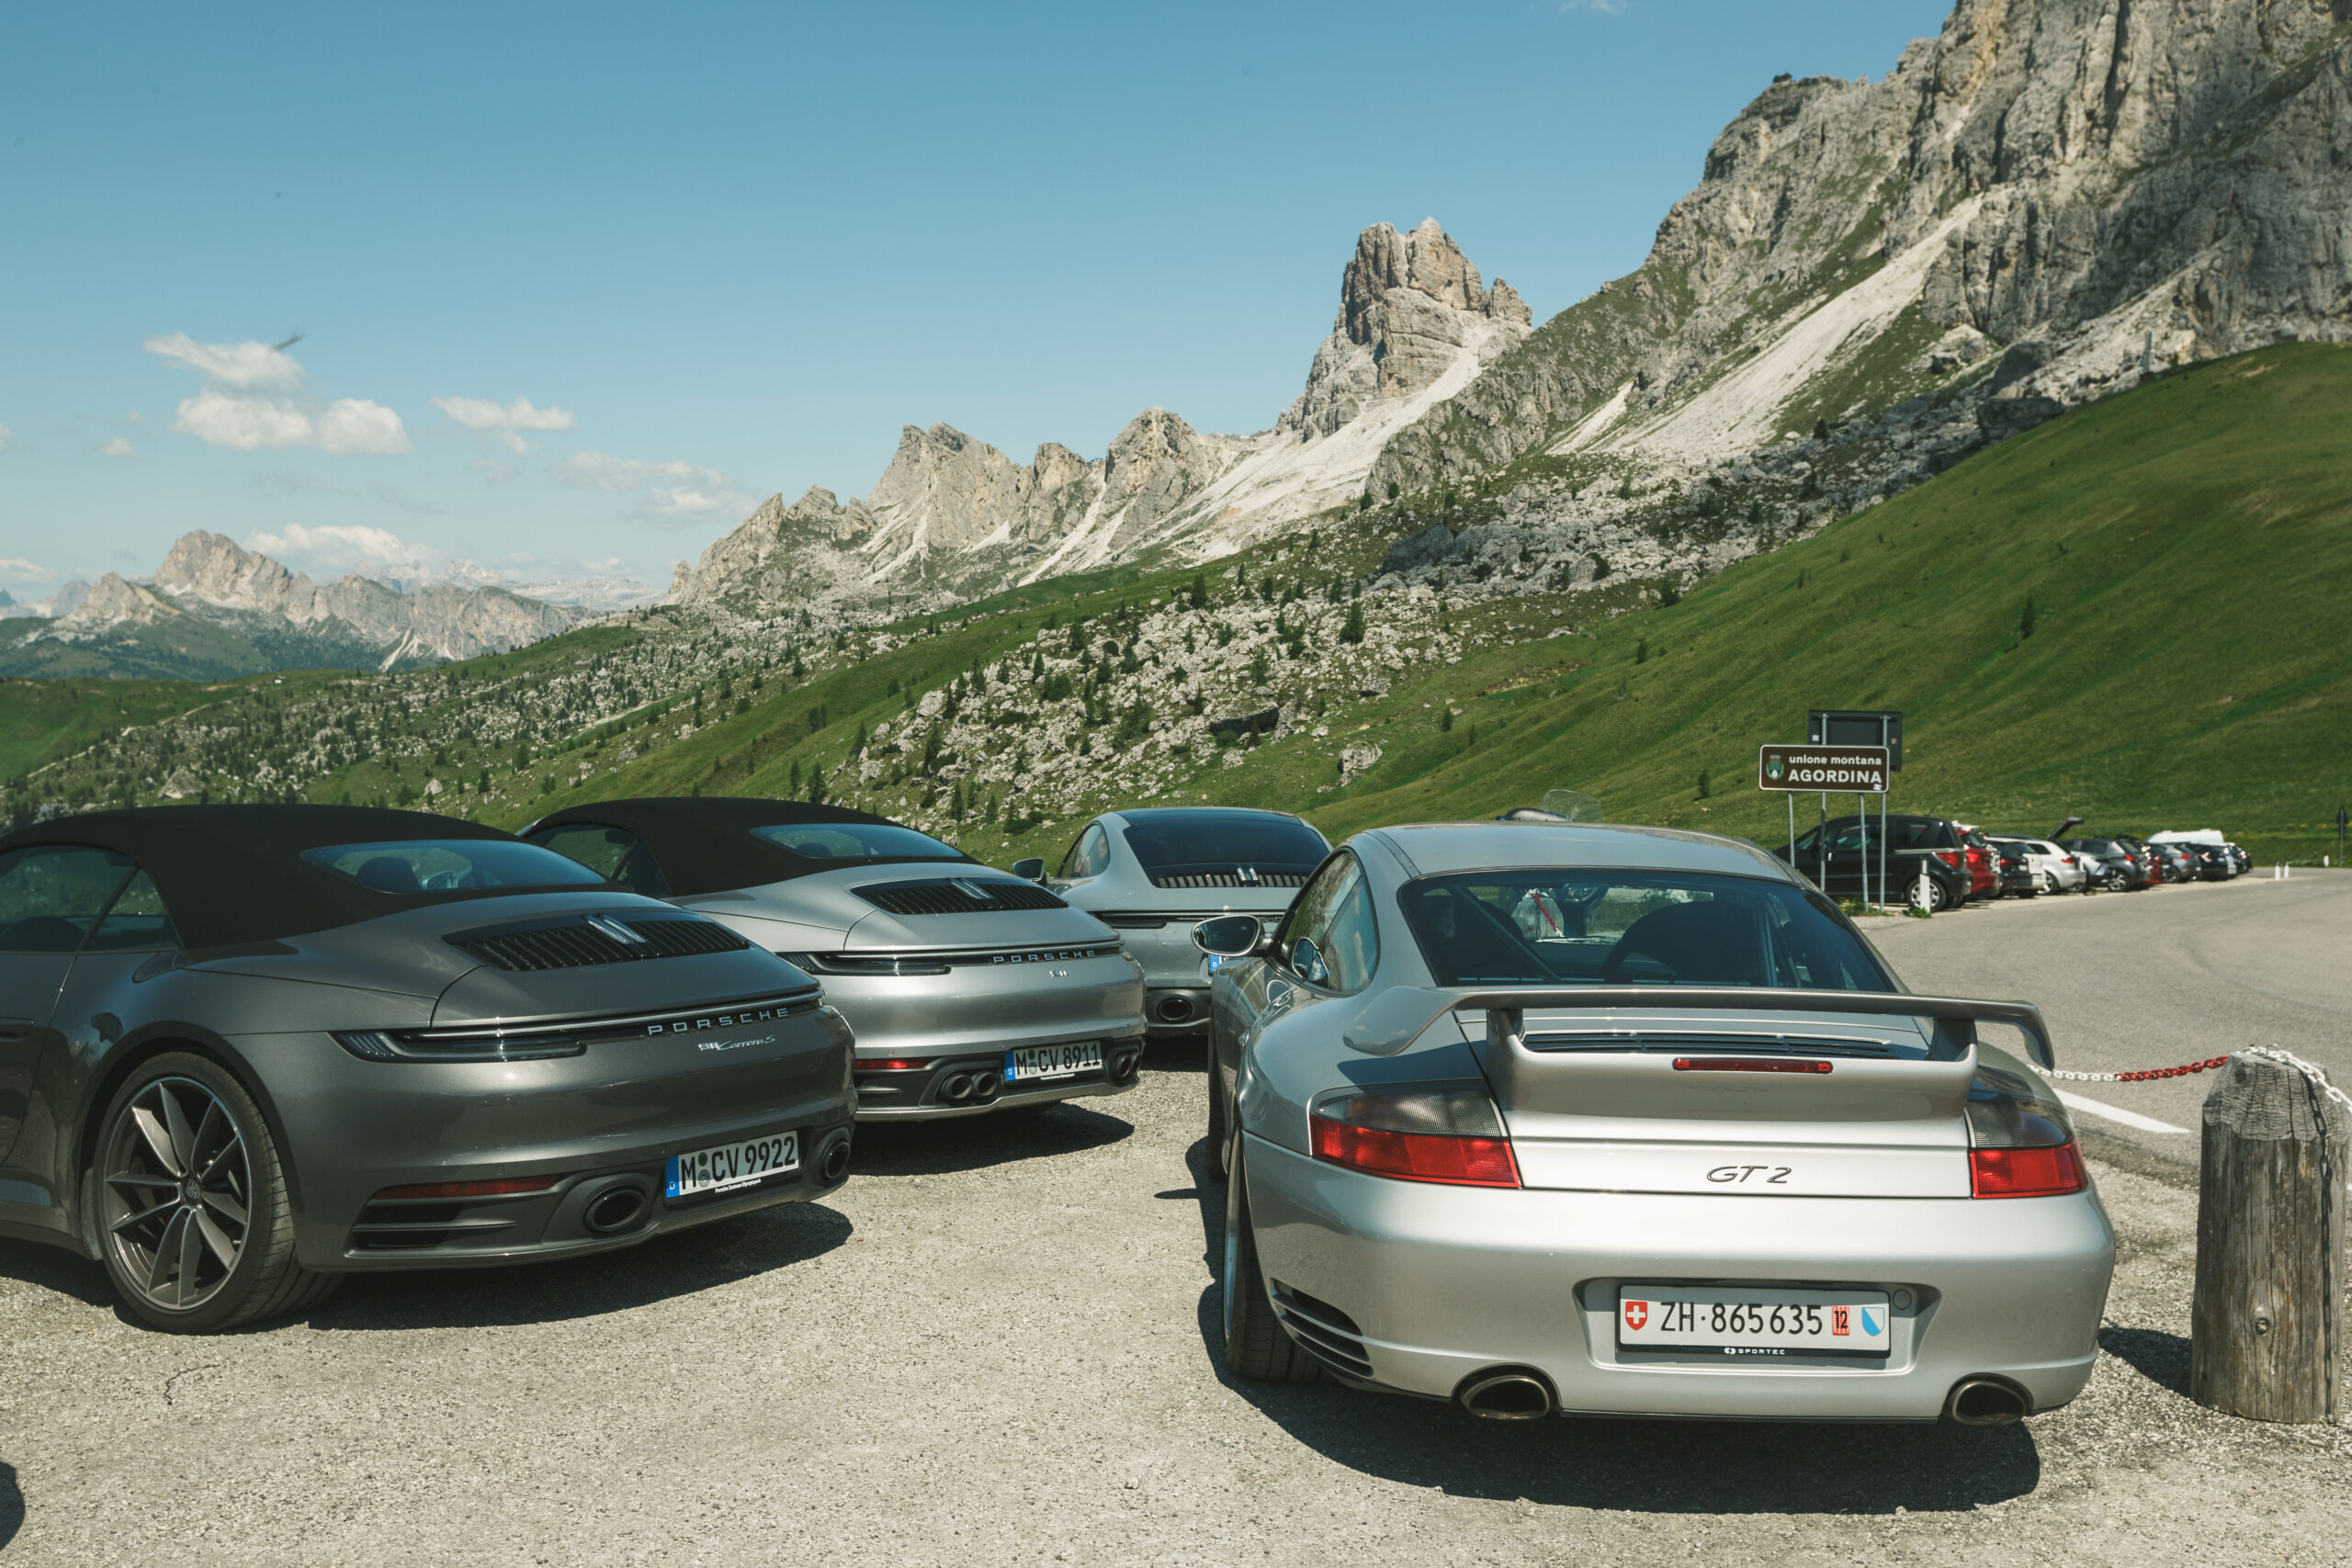 Porsche driving experience in Germany, Austria, Italy